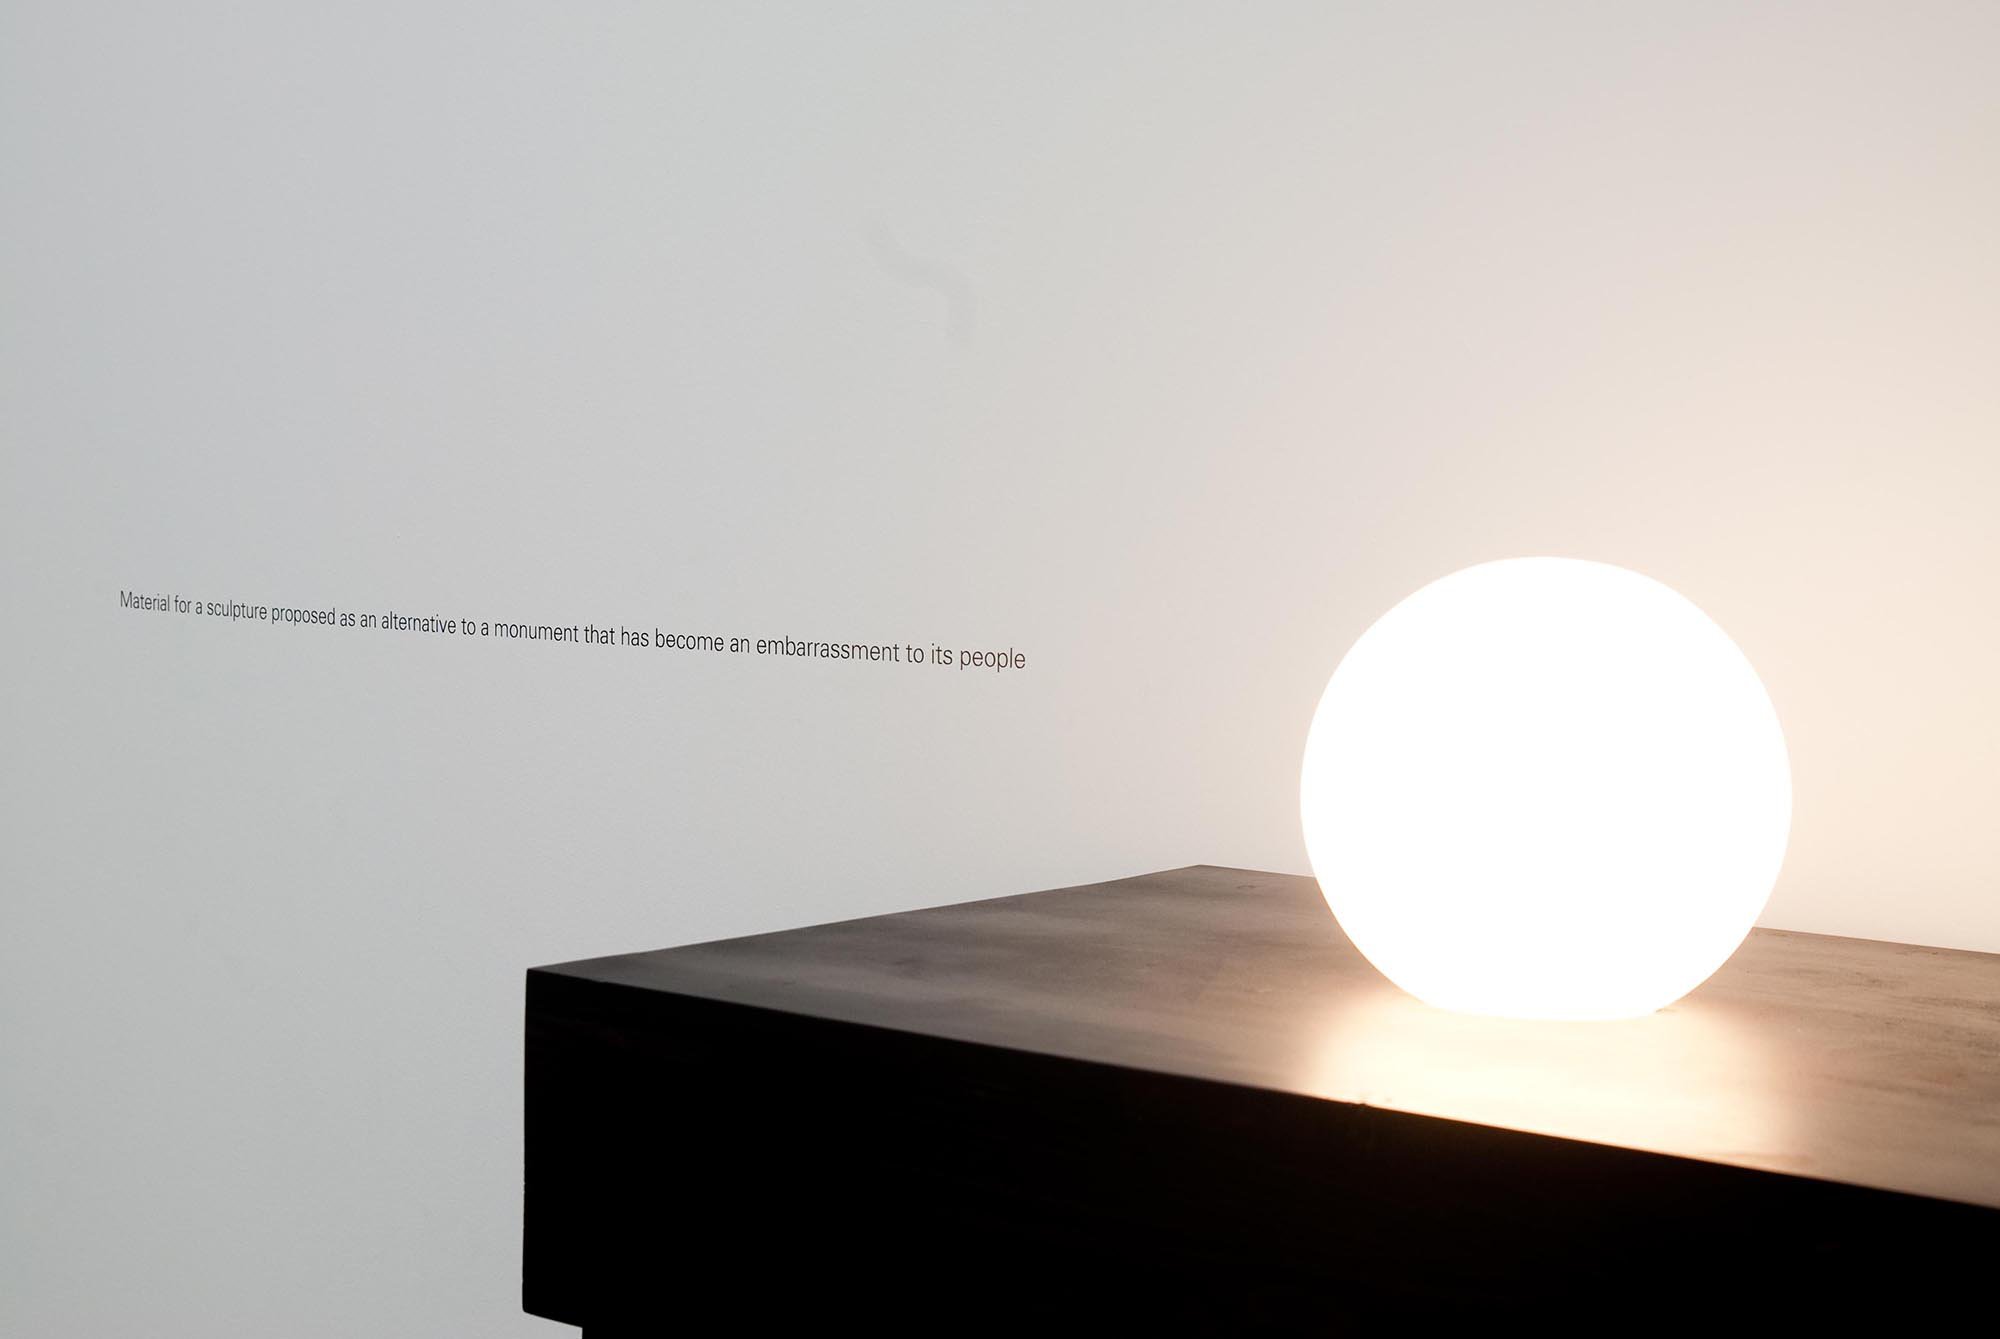 Iman Issa, Material for a sculpture presented as an alternative to a monument that has become an embarrassment to its people, detail, 2 light bulbs, dark walnut plywood table, 150 x 50 x 120 cm (59 x 19 3/4 x 47 1/4 in), light bulbs are synced in a loop, one lights up while the other slowly fades, 64 points vinyl writing, 2010